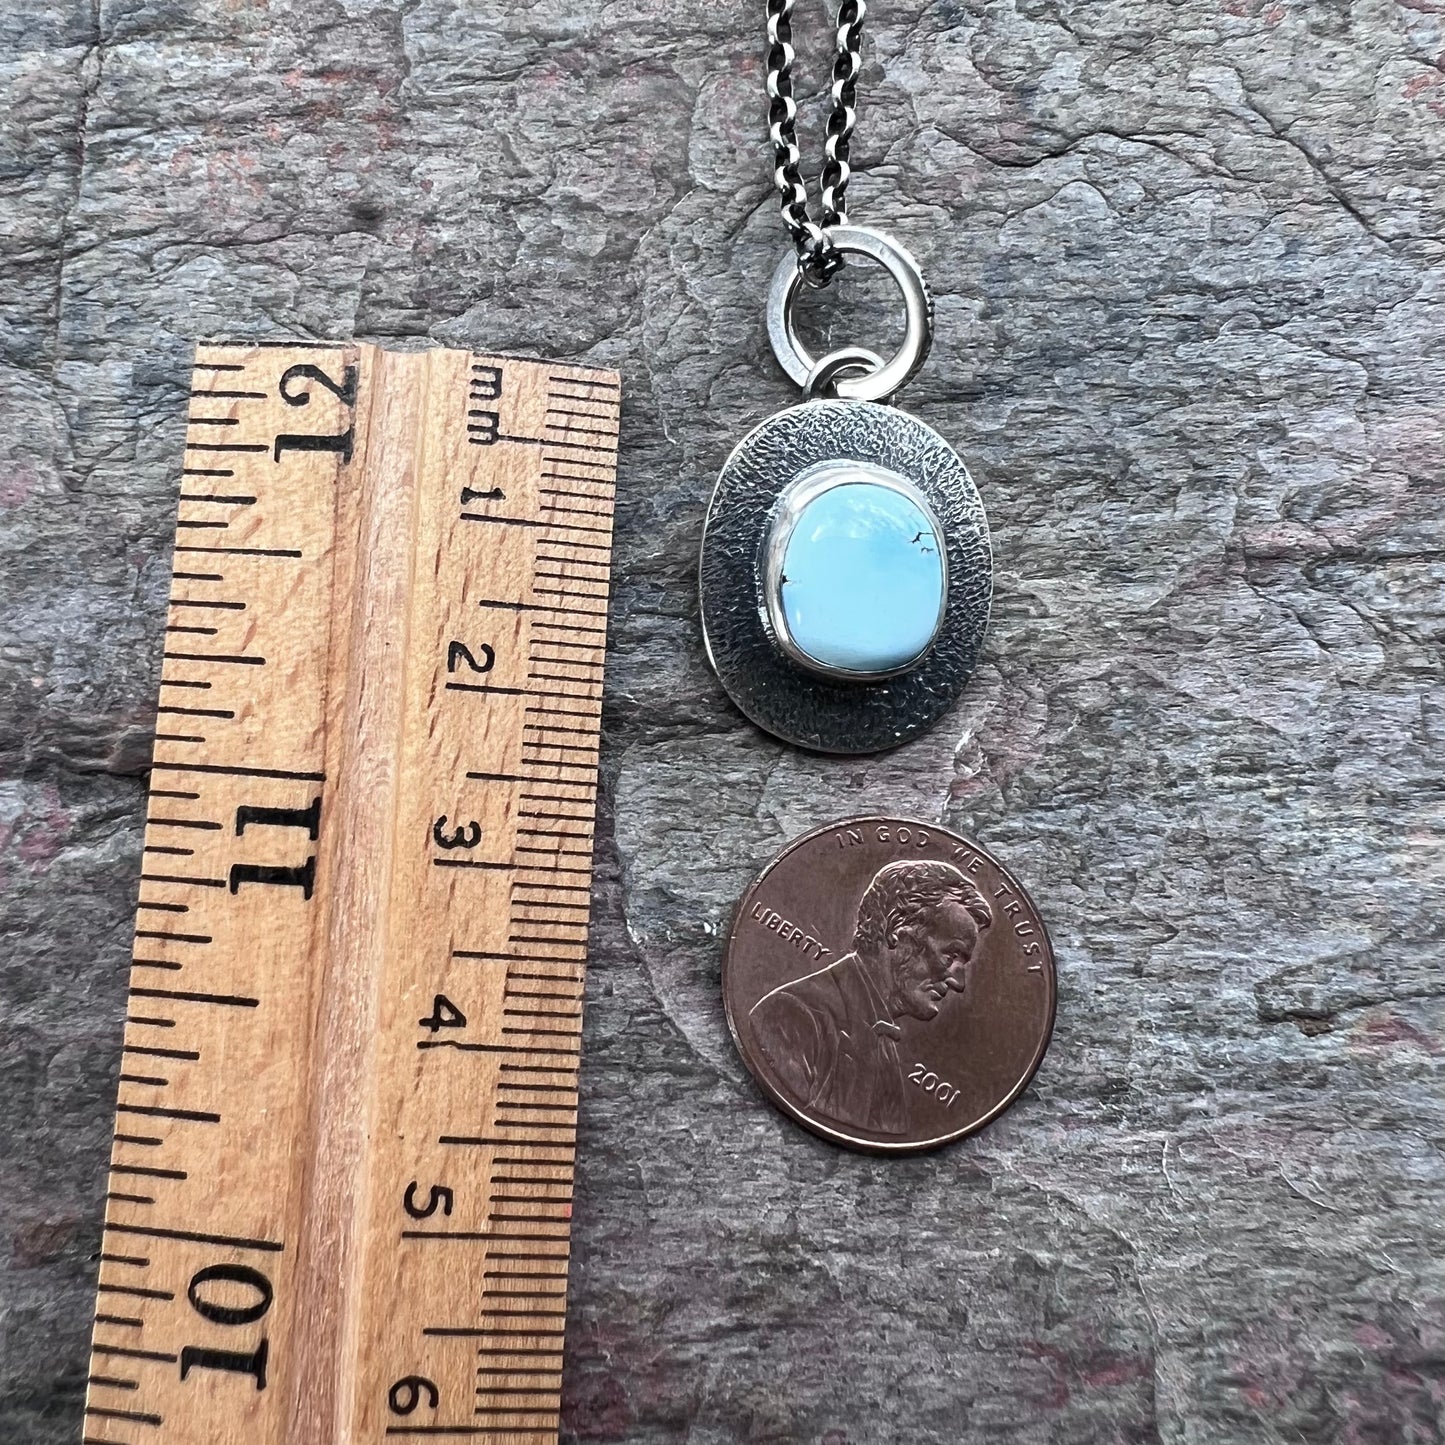 Golden Hill Turquoise Sterling Silver Necklace - One-of-a-Kind Turquoise Pendant on Sterling Silver Chain